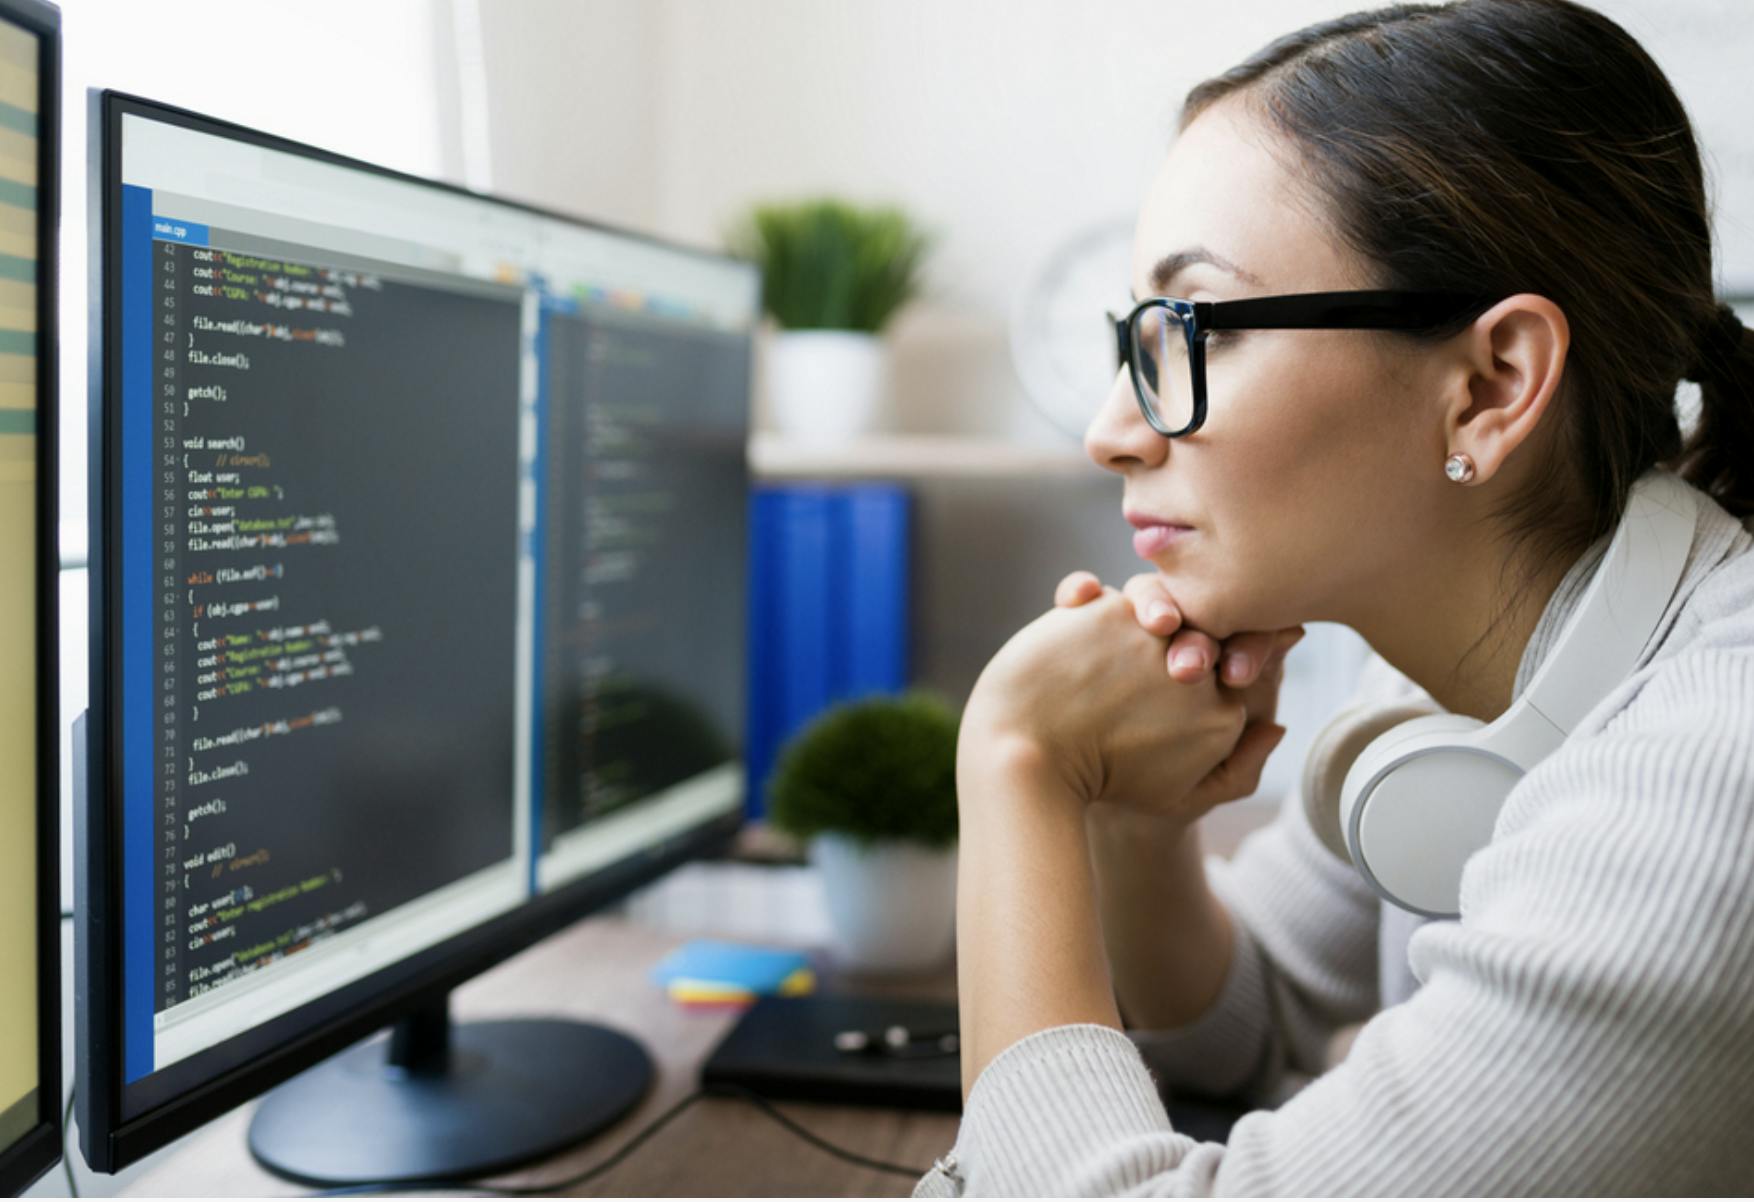 Image of a woman wearing glasses leaning towards a computer screen with code on it. Related to: devsecops user experience, user experience at gsa, software development frameworks improving customer experience.